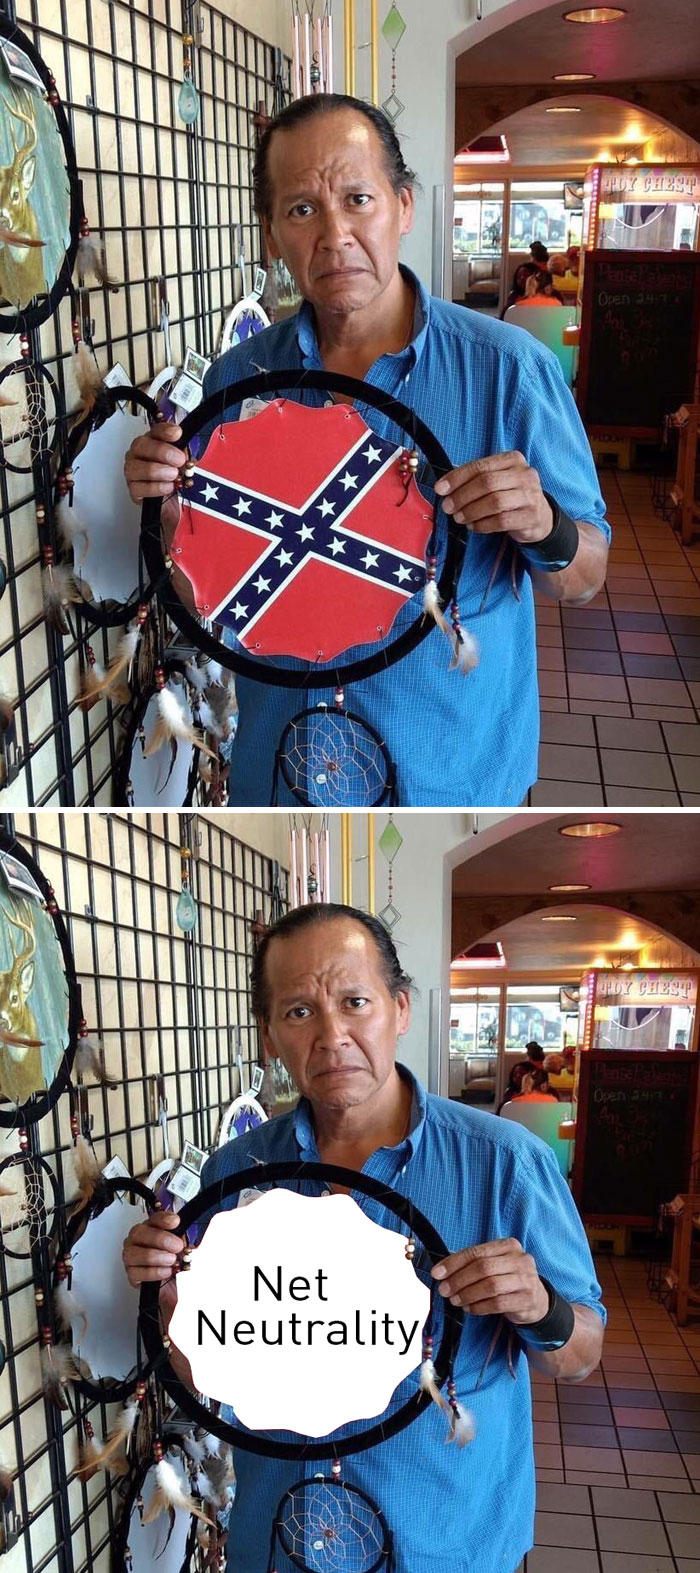 A Shocked/Sadden Native American Man With A Confederate Flag Dream Catcher